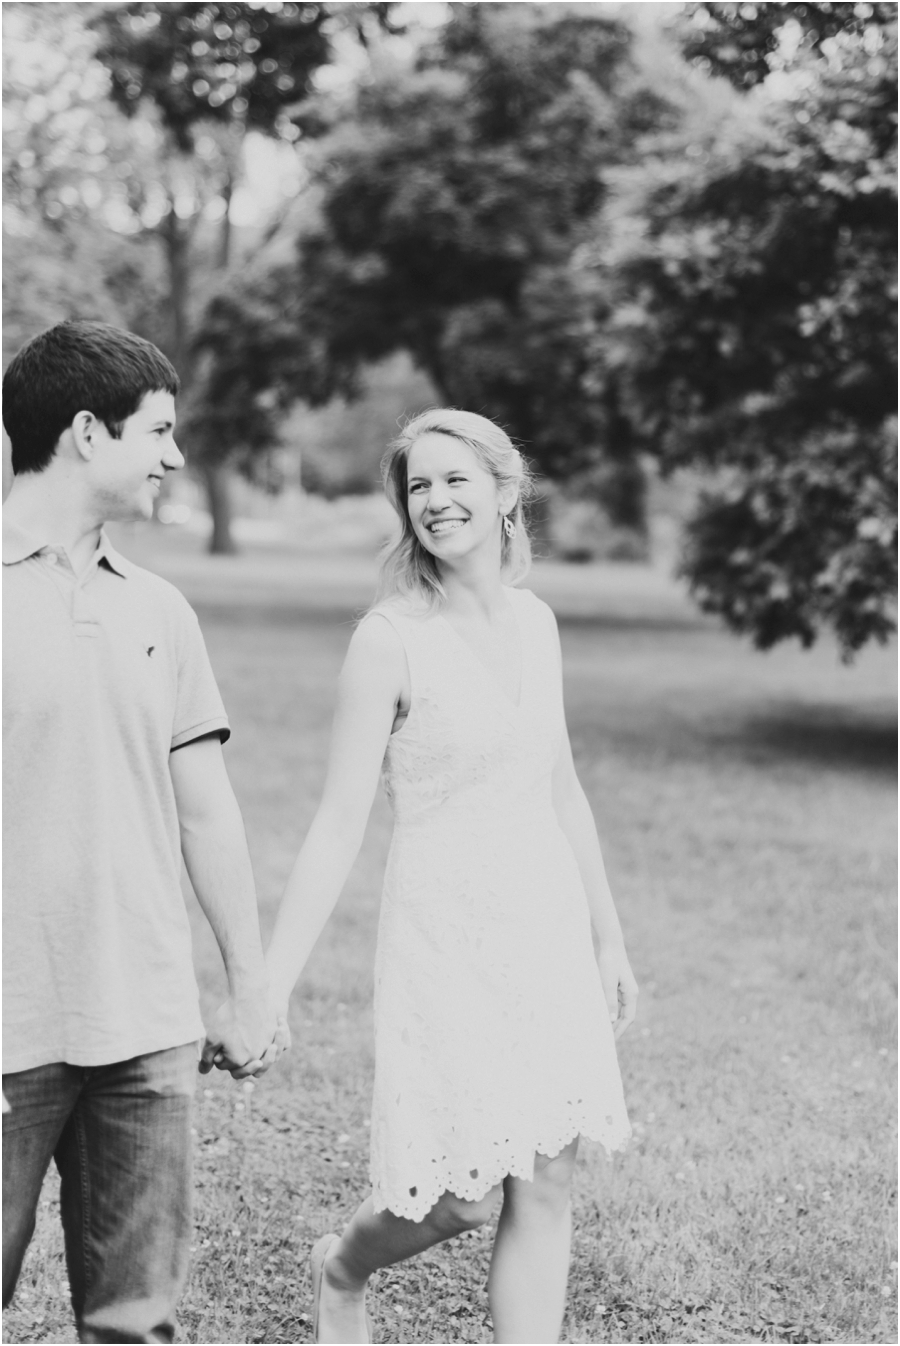 Summer Engagement Session at Valley Forge by Pennsylvania Film Photographer Hillary Muelleck